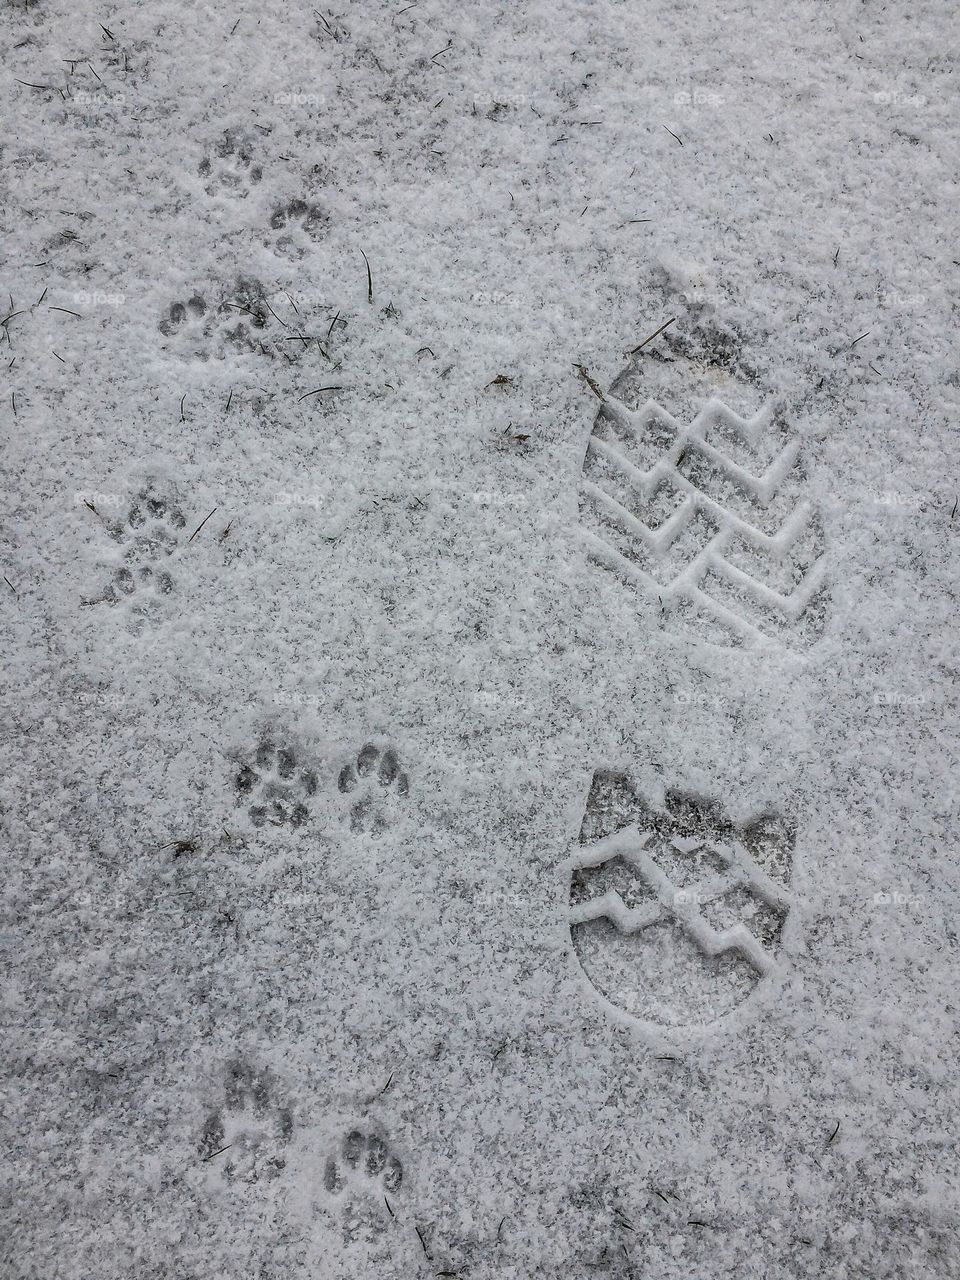 Footprints in the snow - animal paws and people paws!